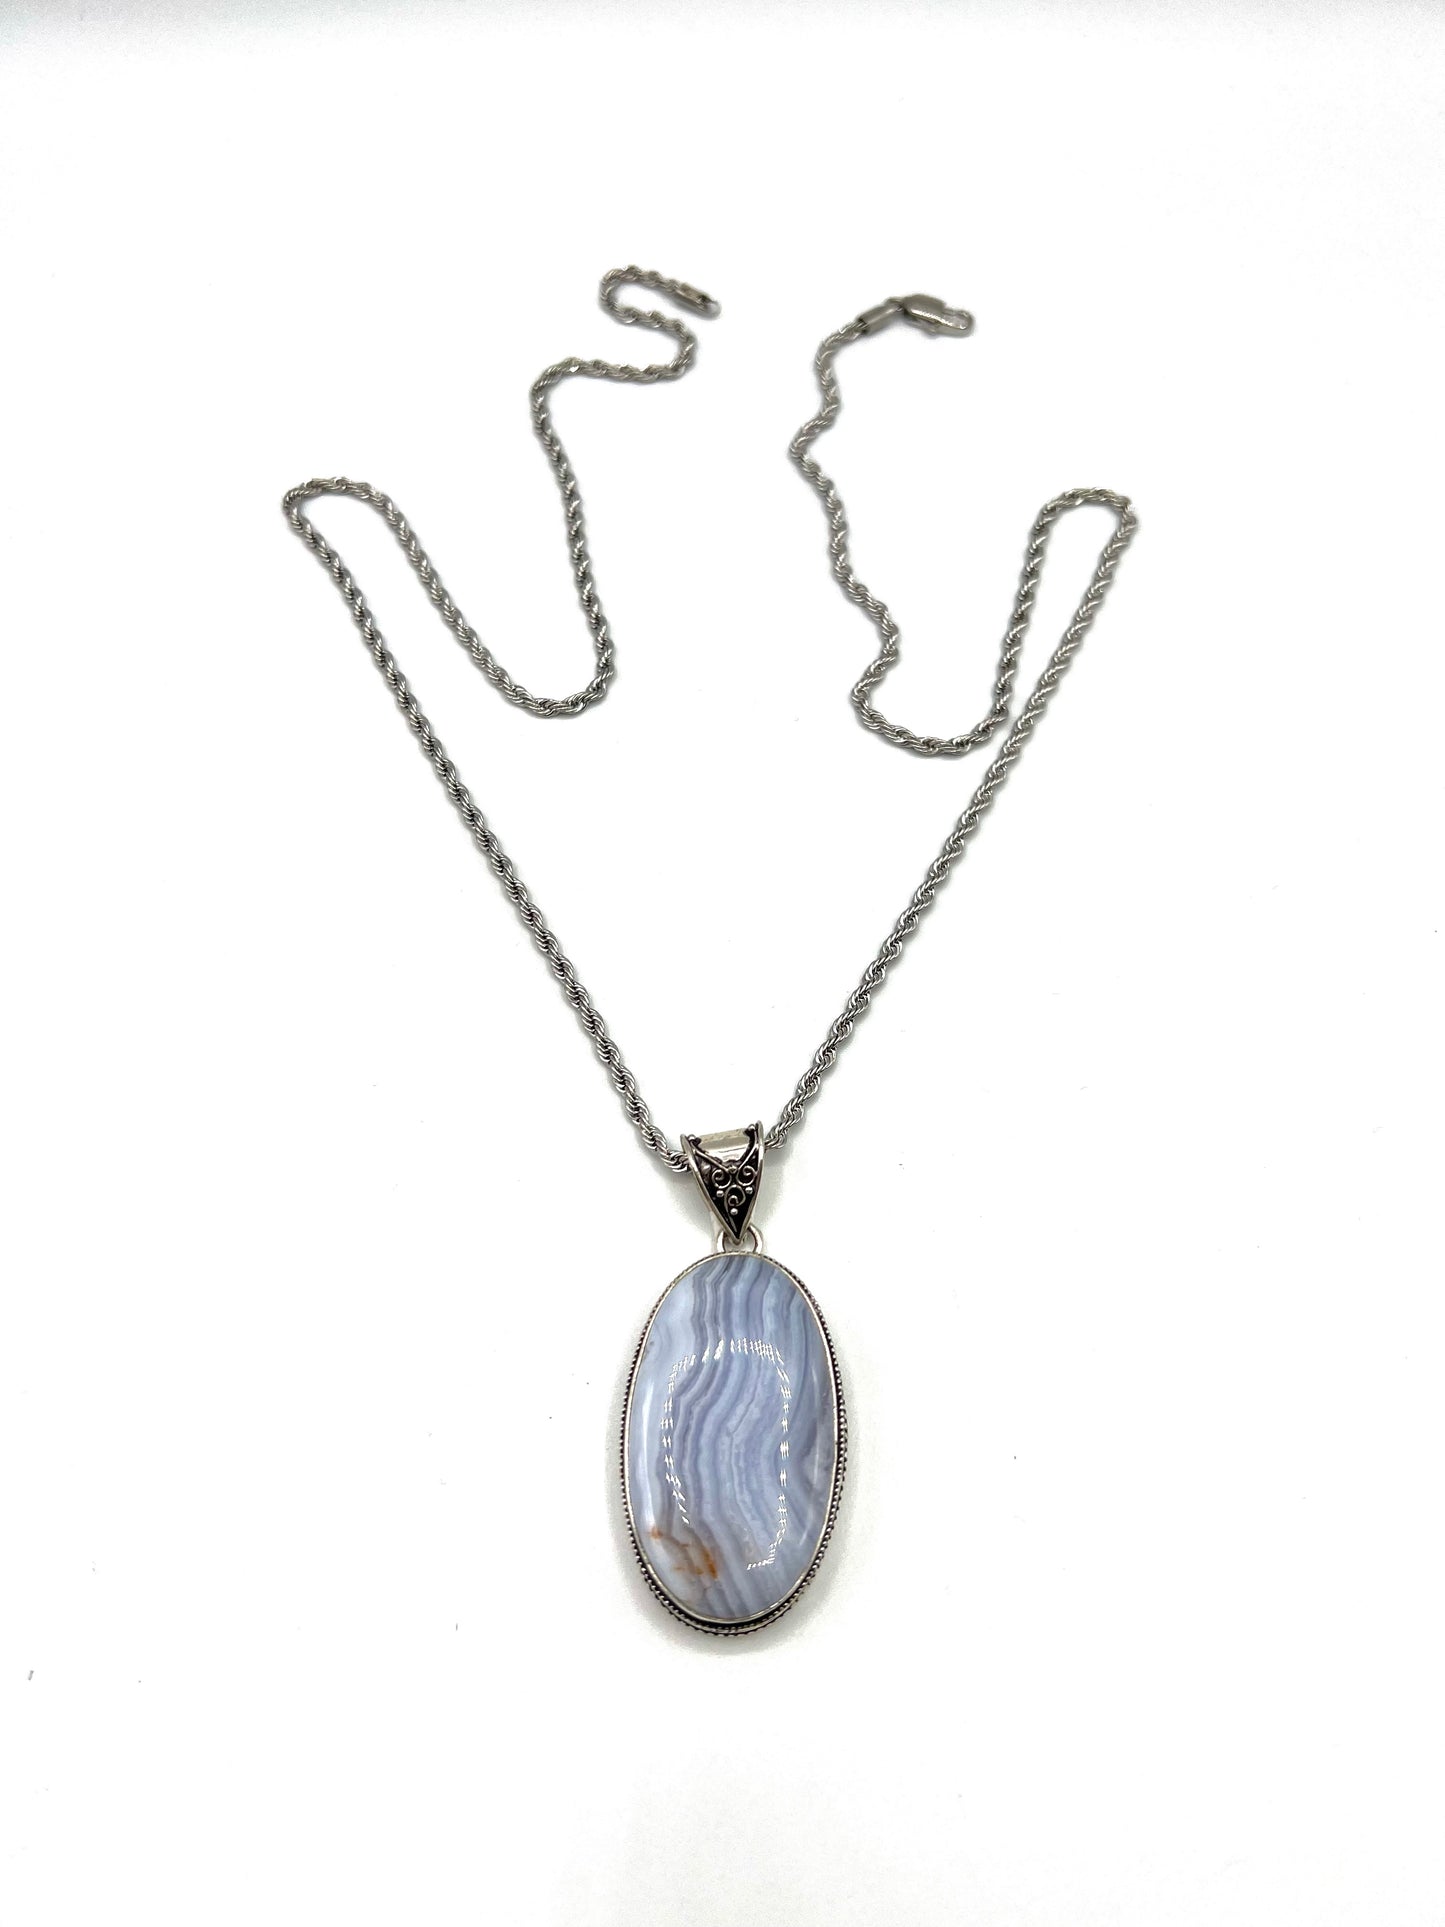 Blue Lace Agate  Sterling Silver Necklace large Pendant Charm Oval Women Or Men